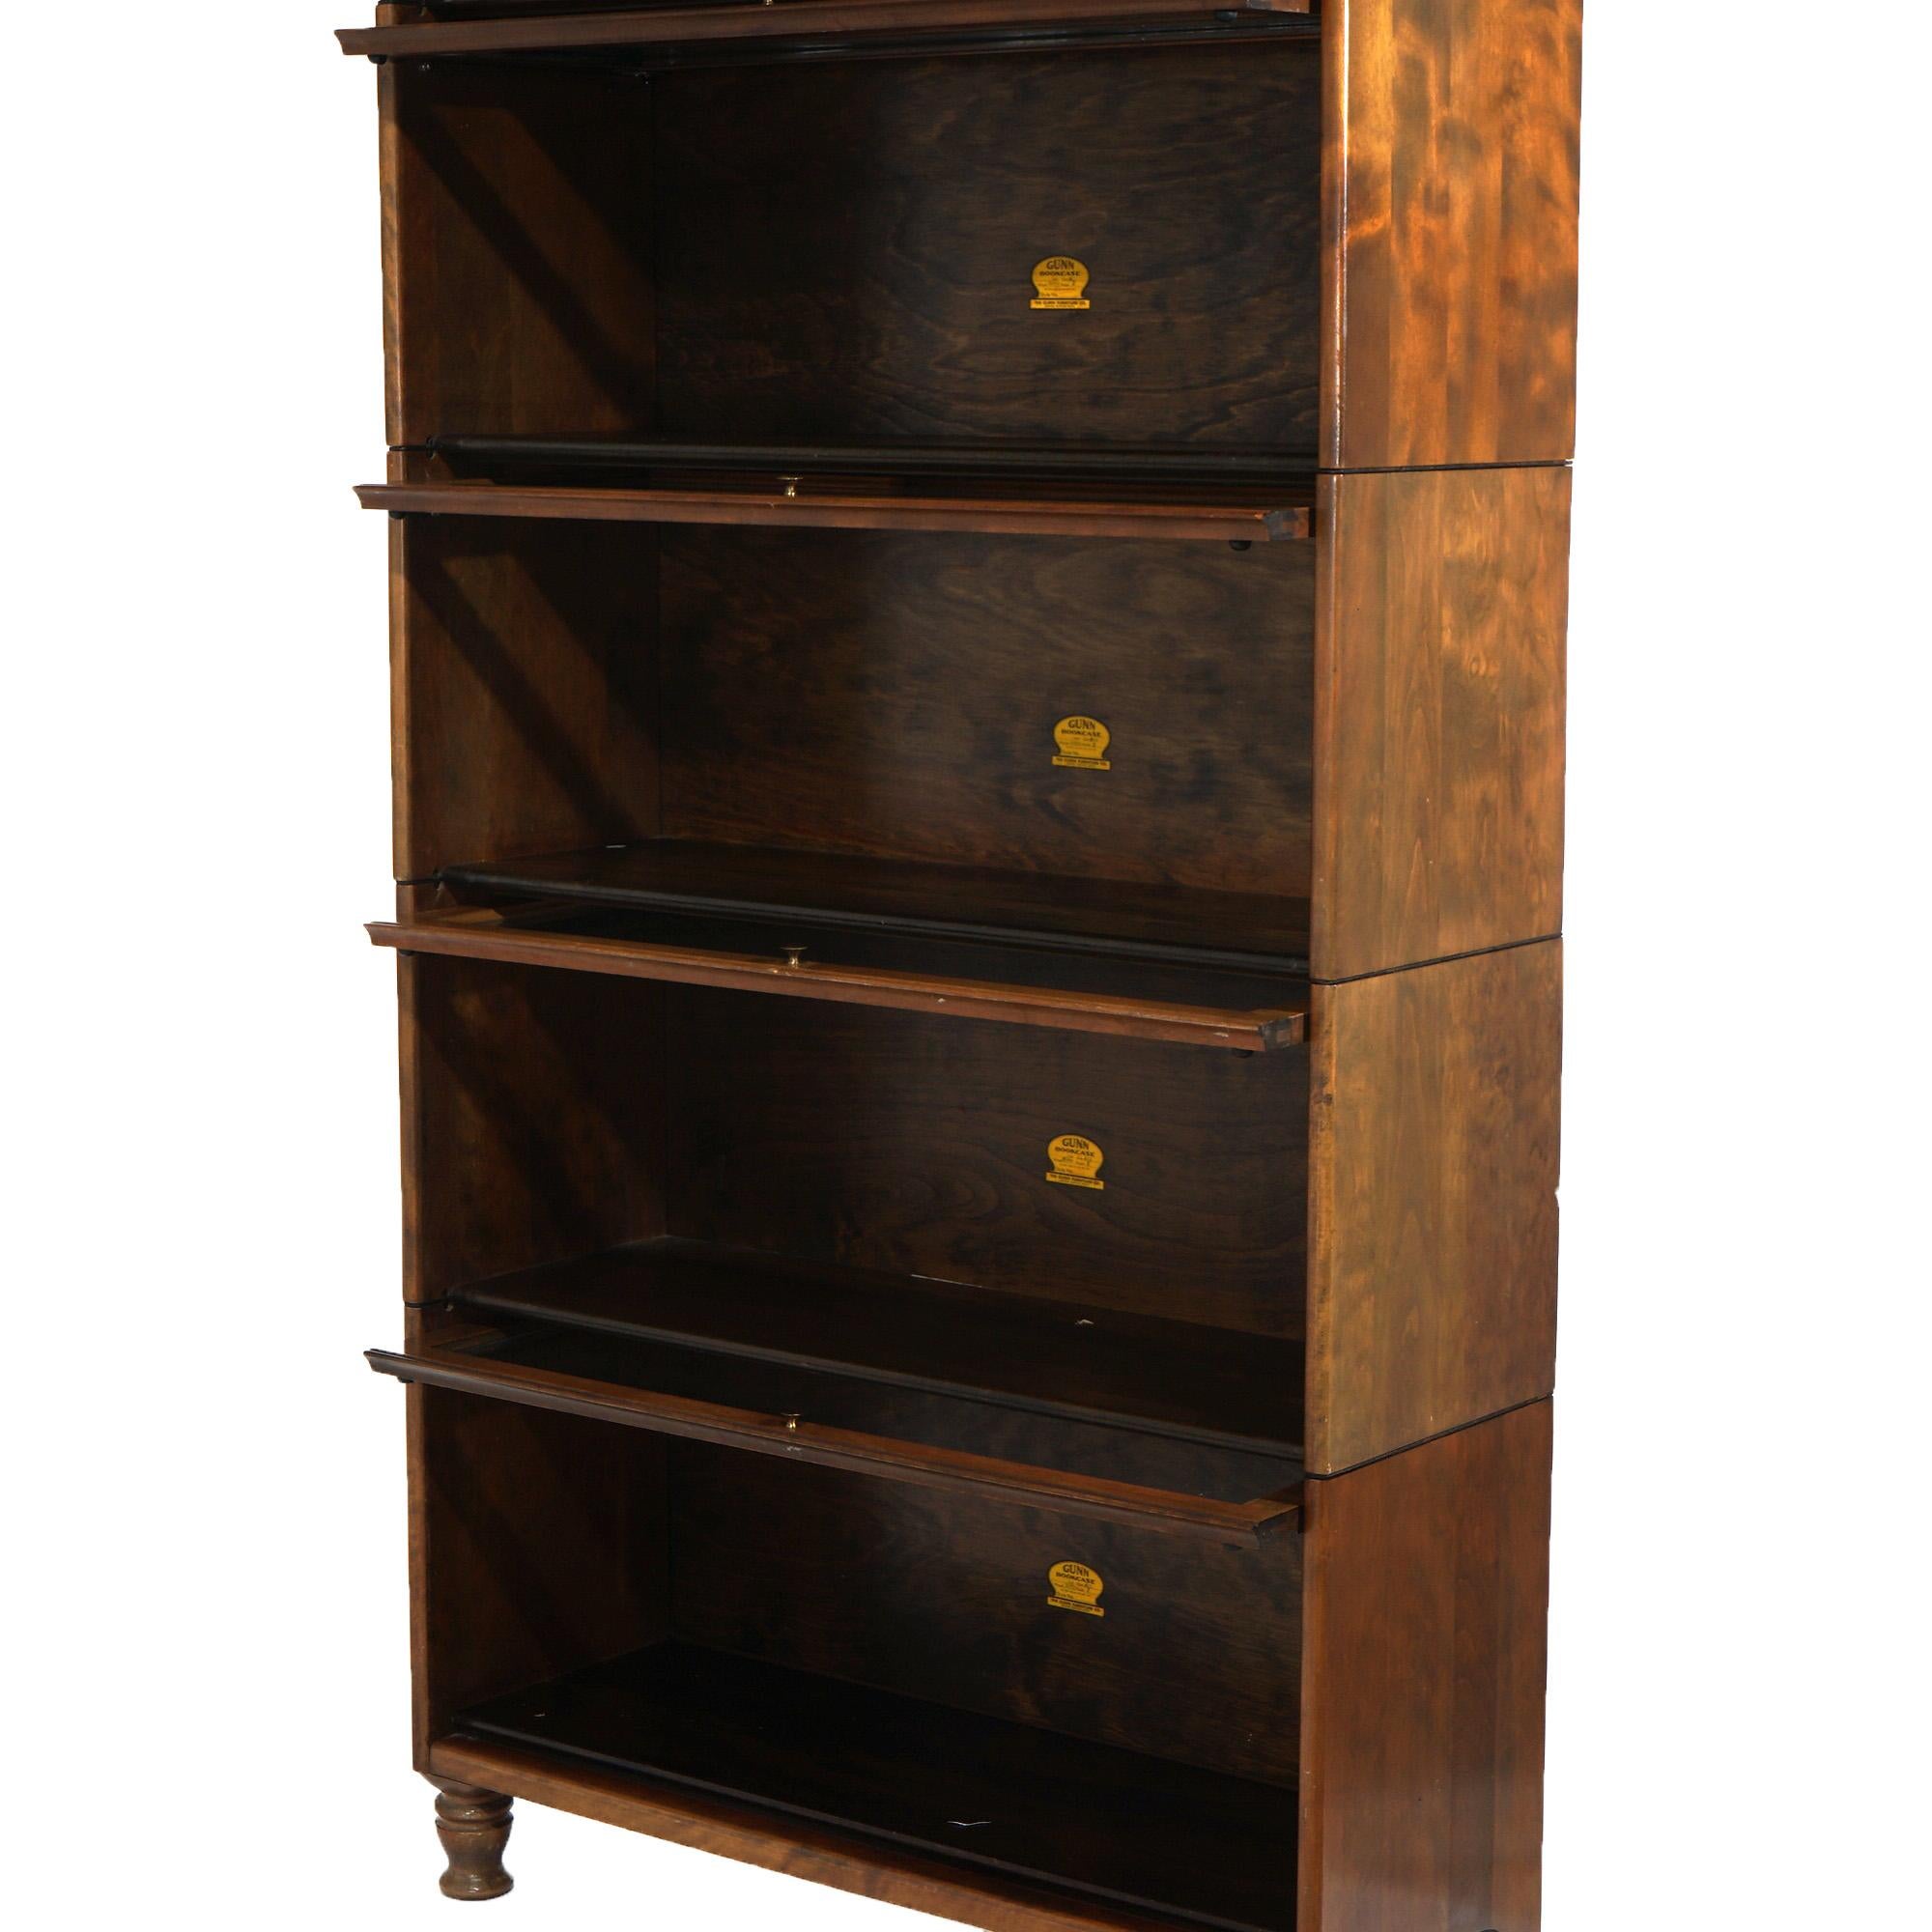 Antique Arts & Crafts Gunn Five Stack Cherry Barrister Bookcase Circa 1910 For Sale 4